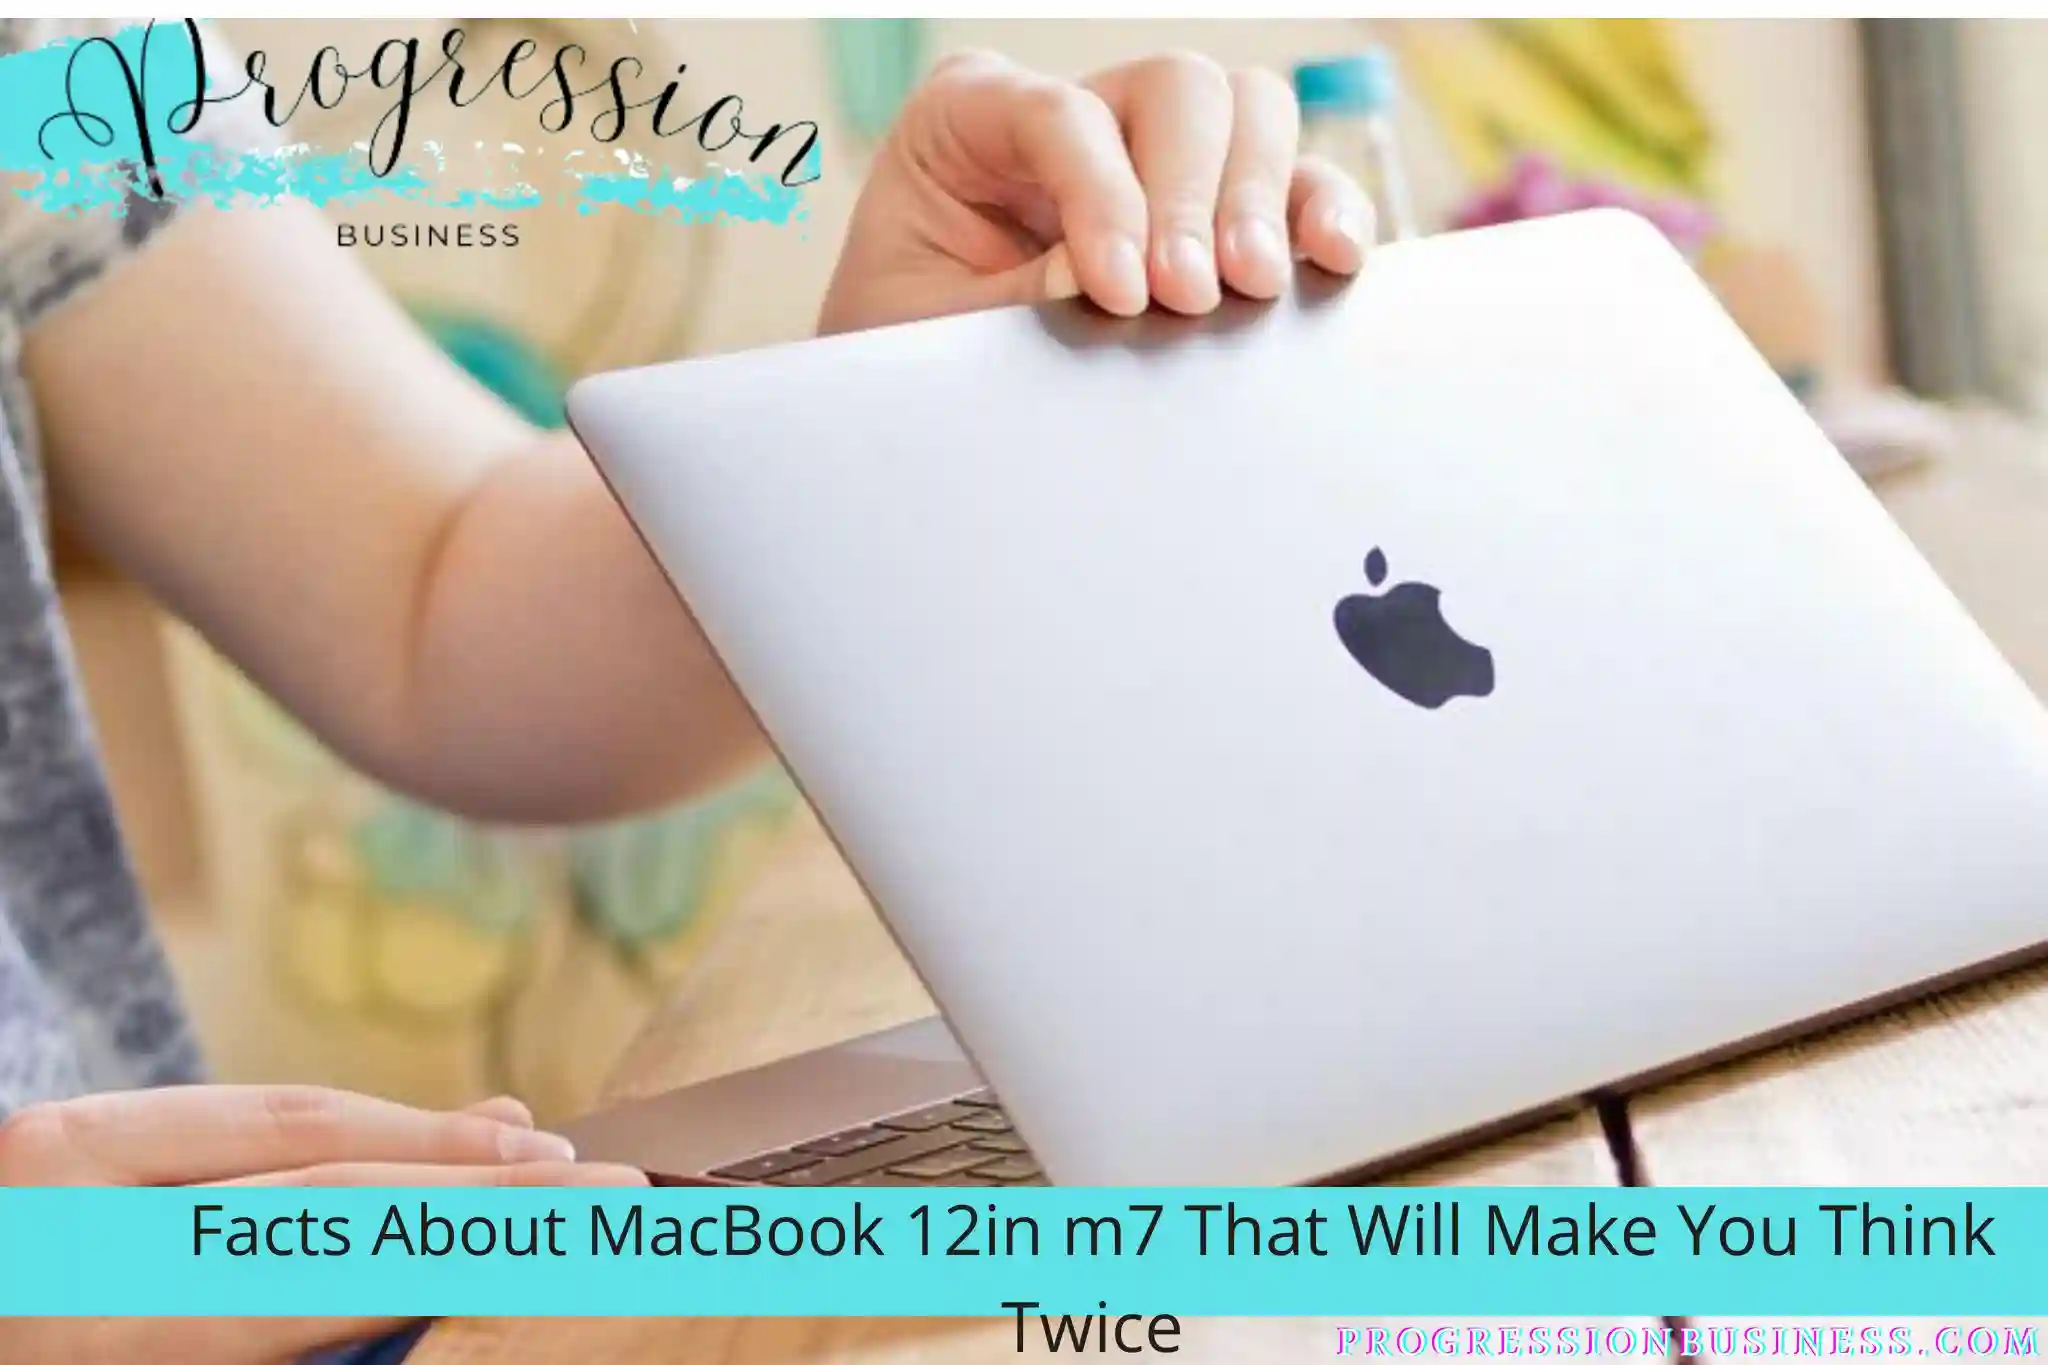 Facts About MacBook 12in m7 That Will Make You Think Twice